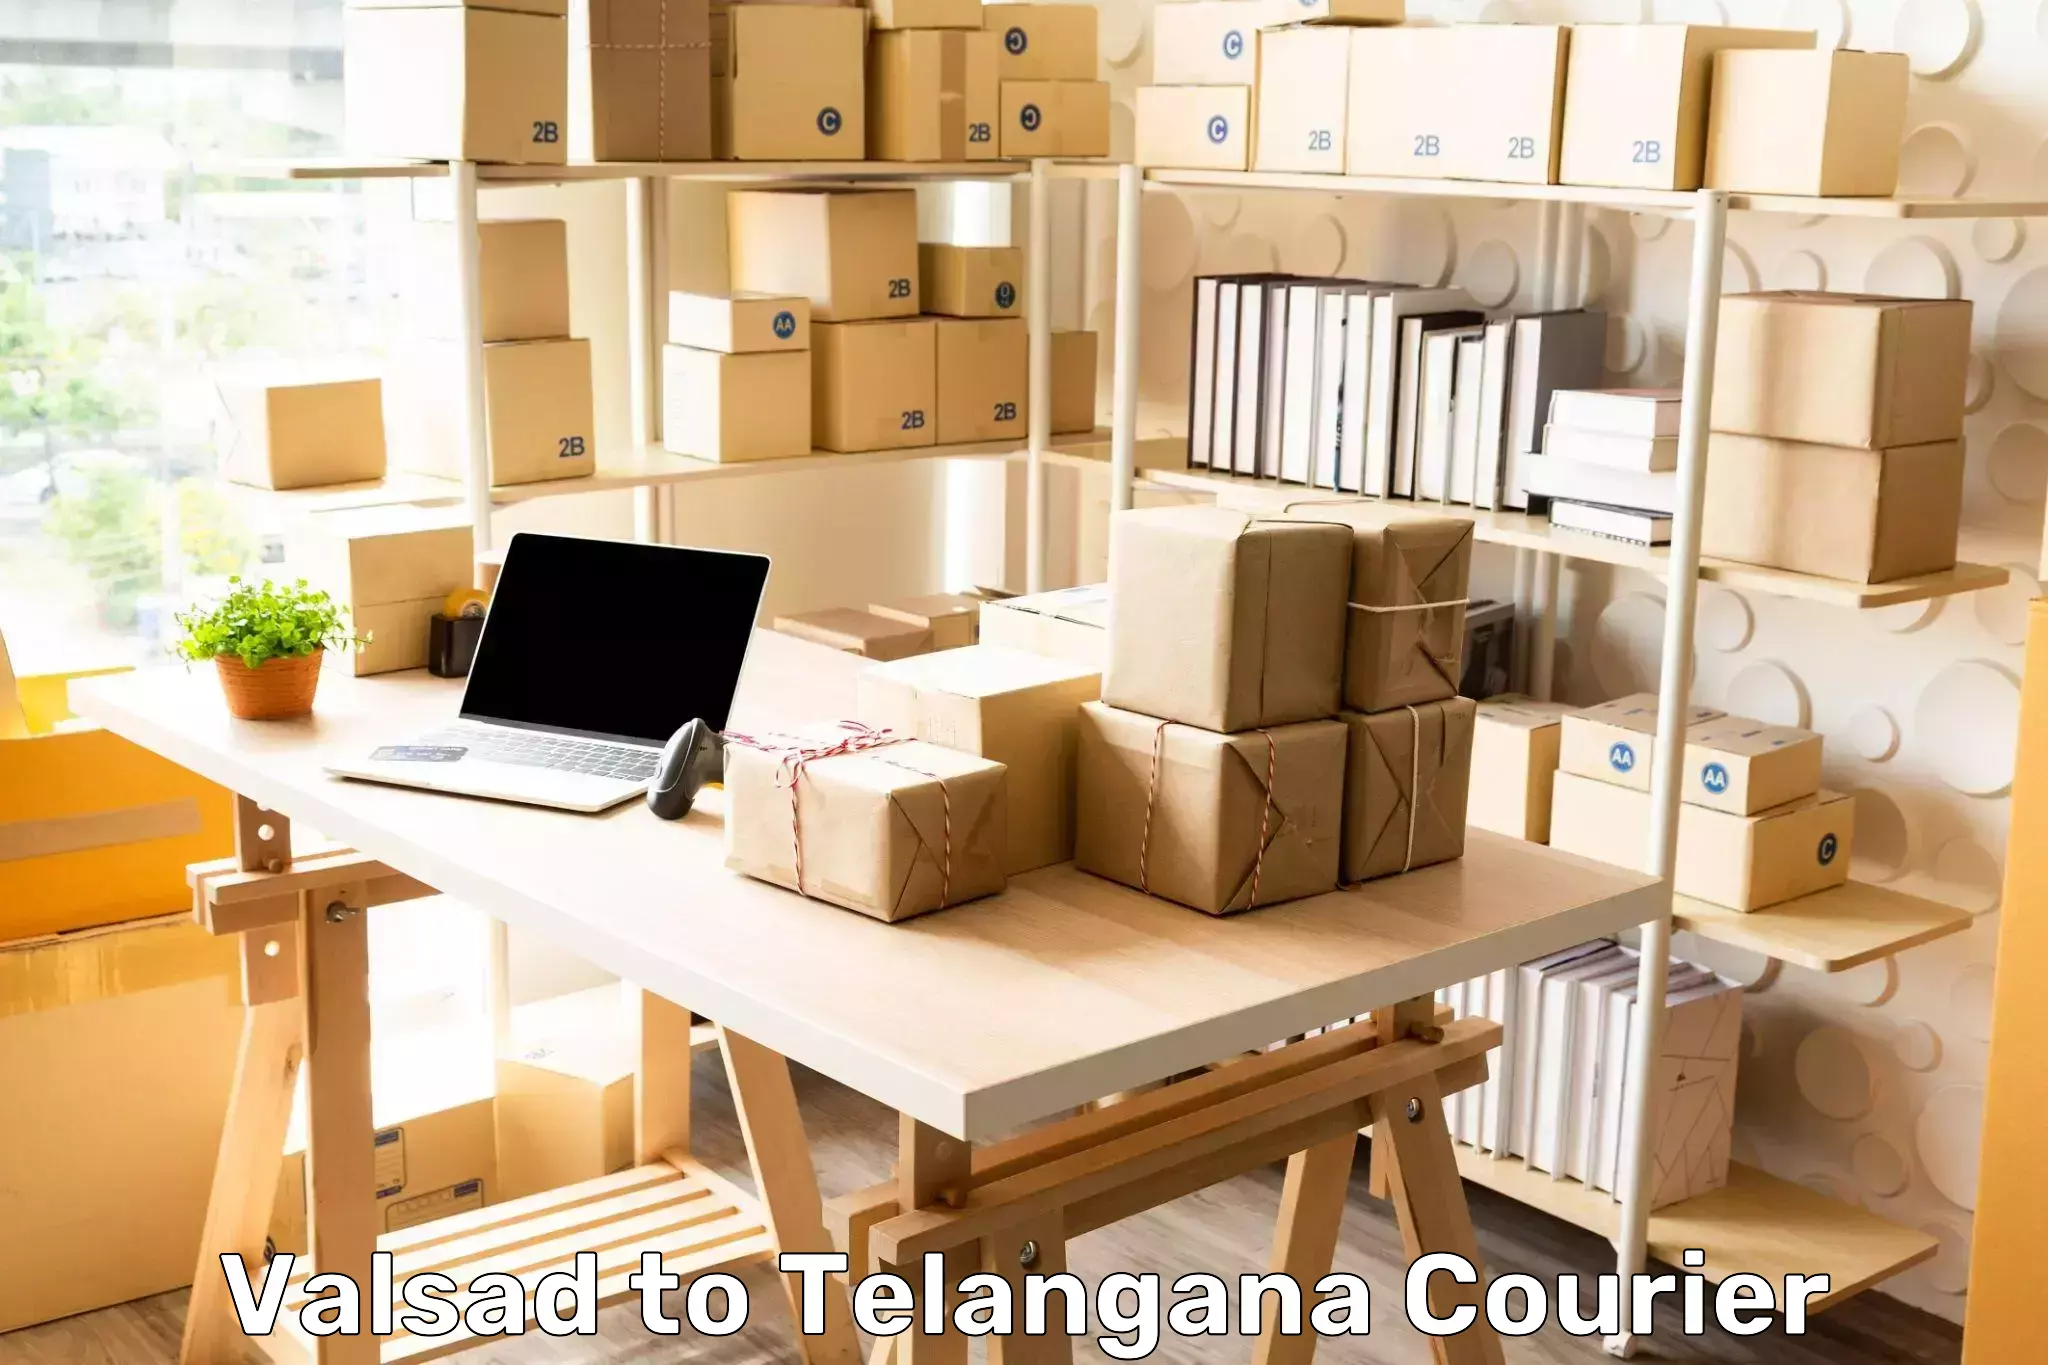 Large-scale shipping solutions Valsad to Balanagar